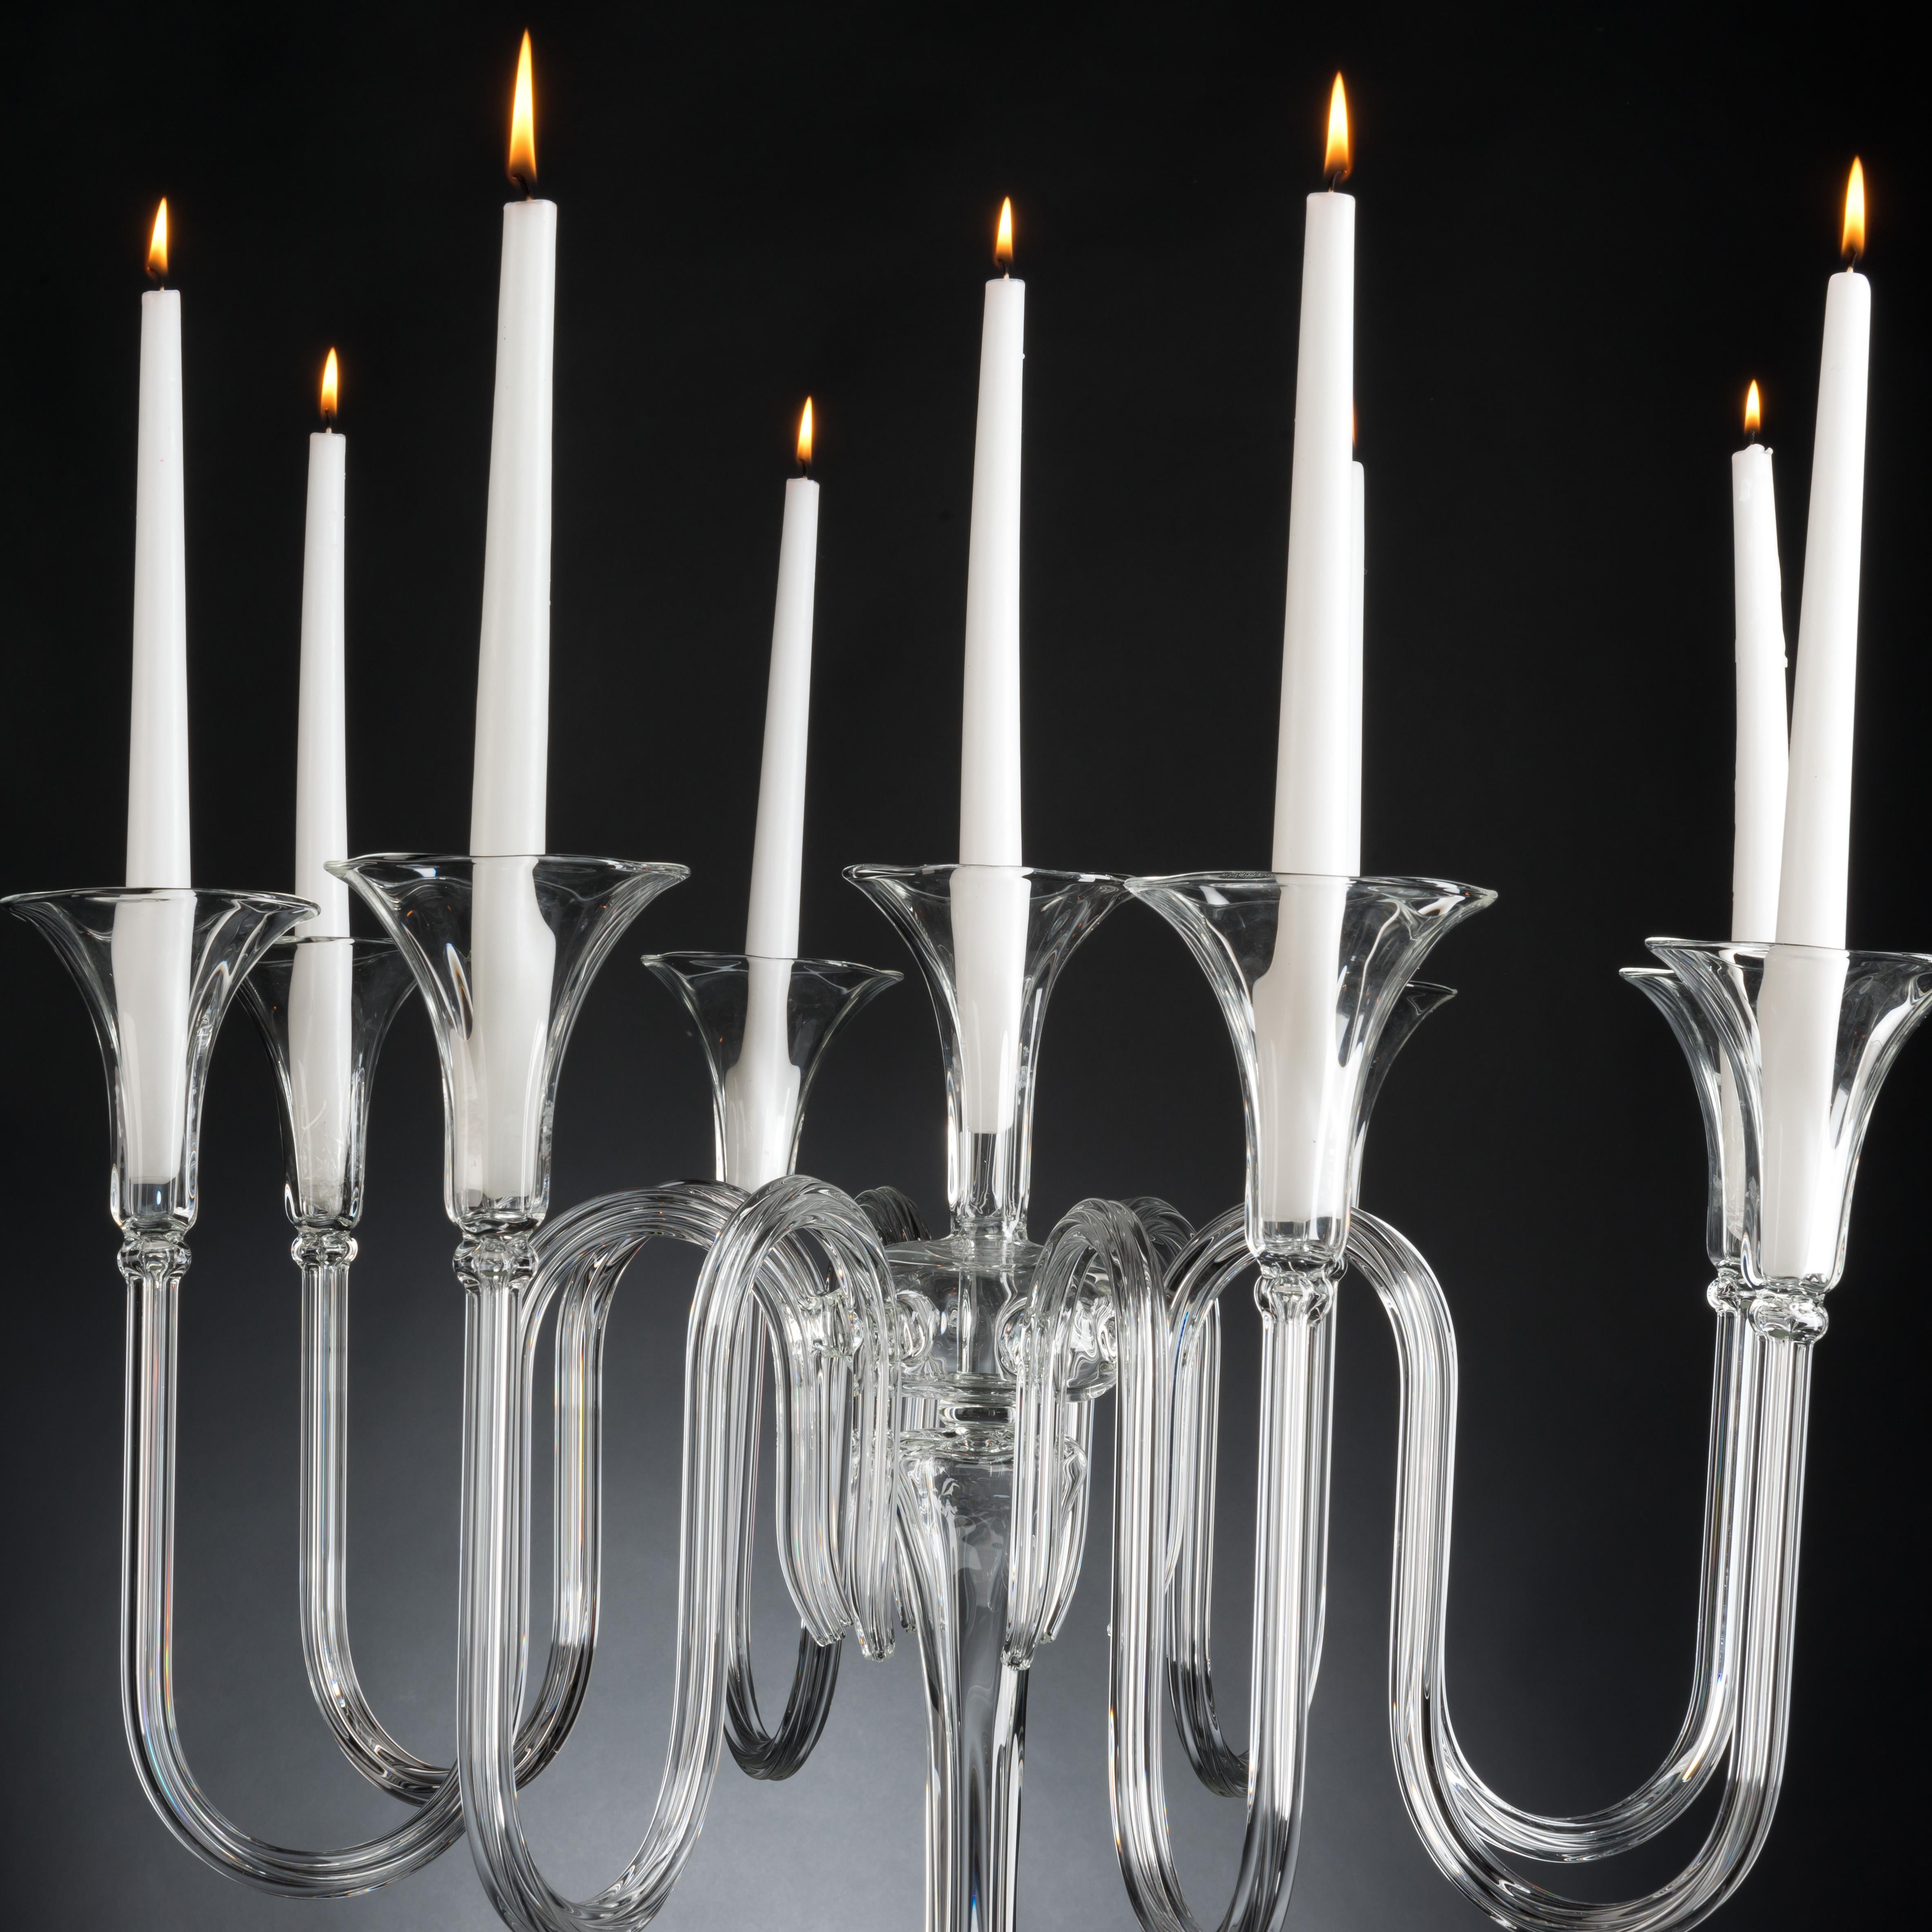 Contemporary Candleholder Royal Pyrex with 9 Arms, in Pyrex, Italy For Sale